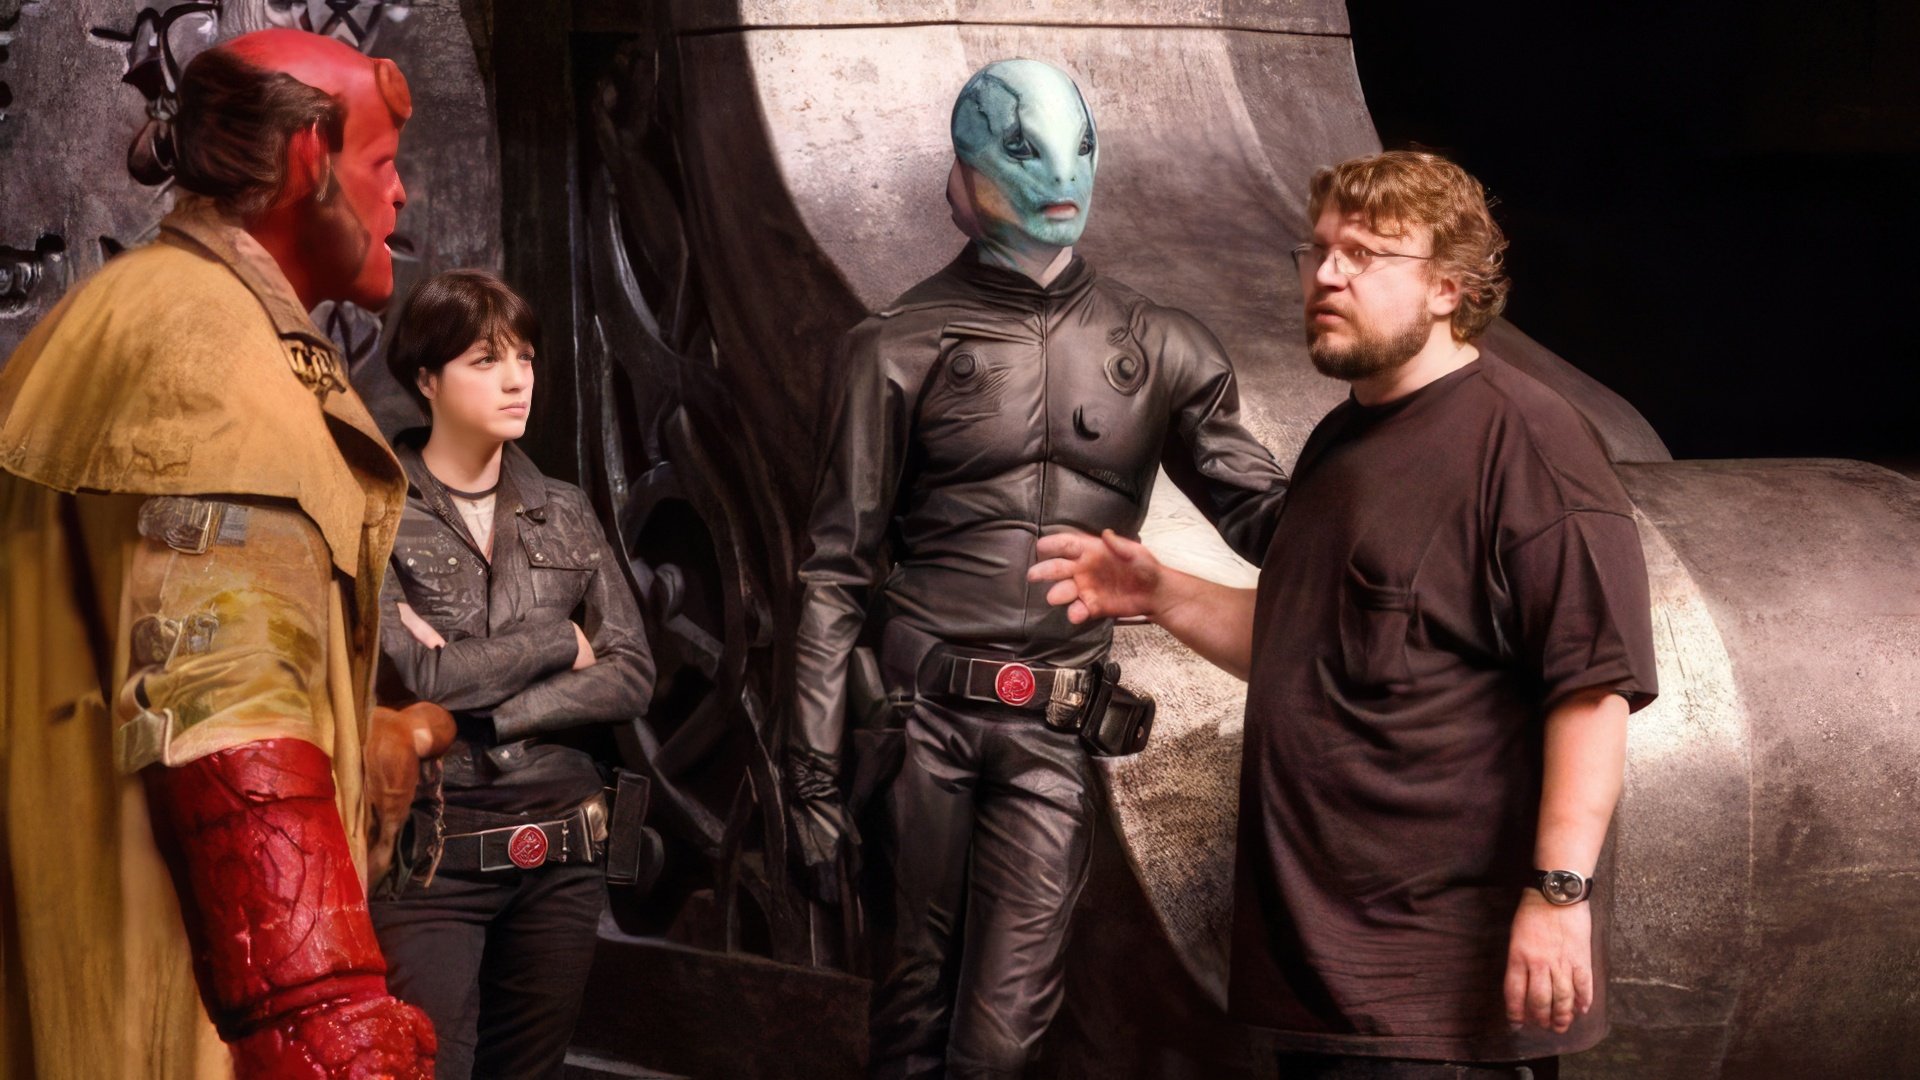 Guillermo del Toro on the set of 'Hellboy'